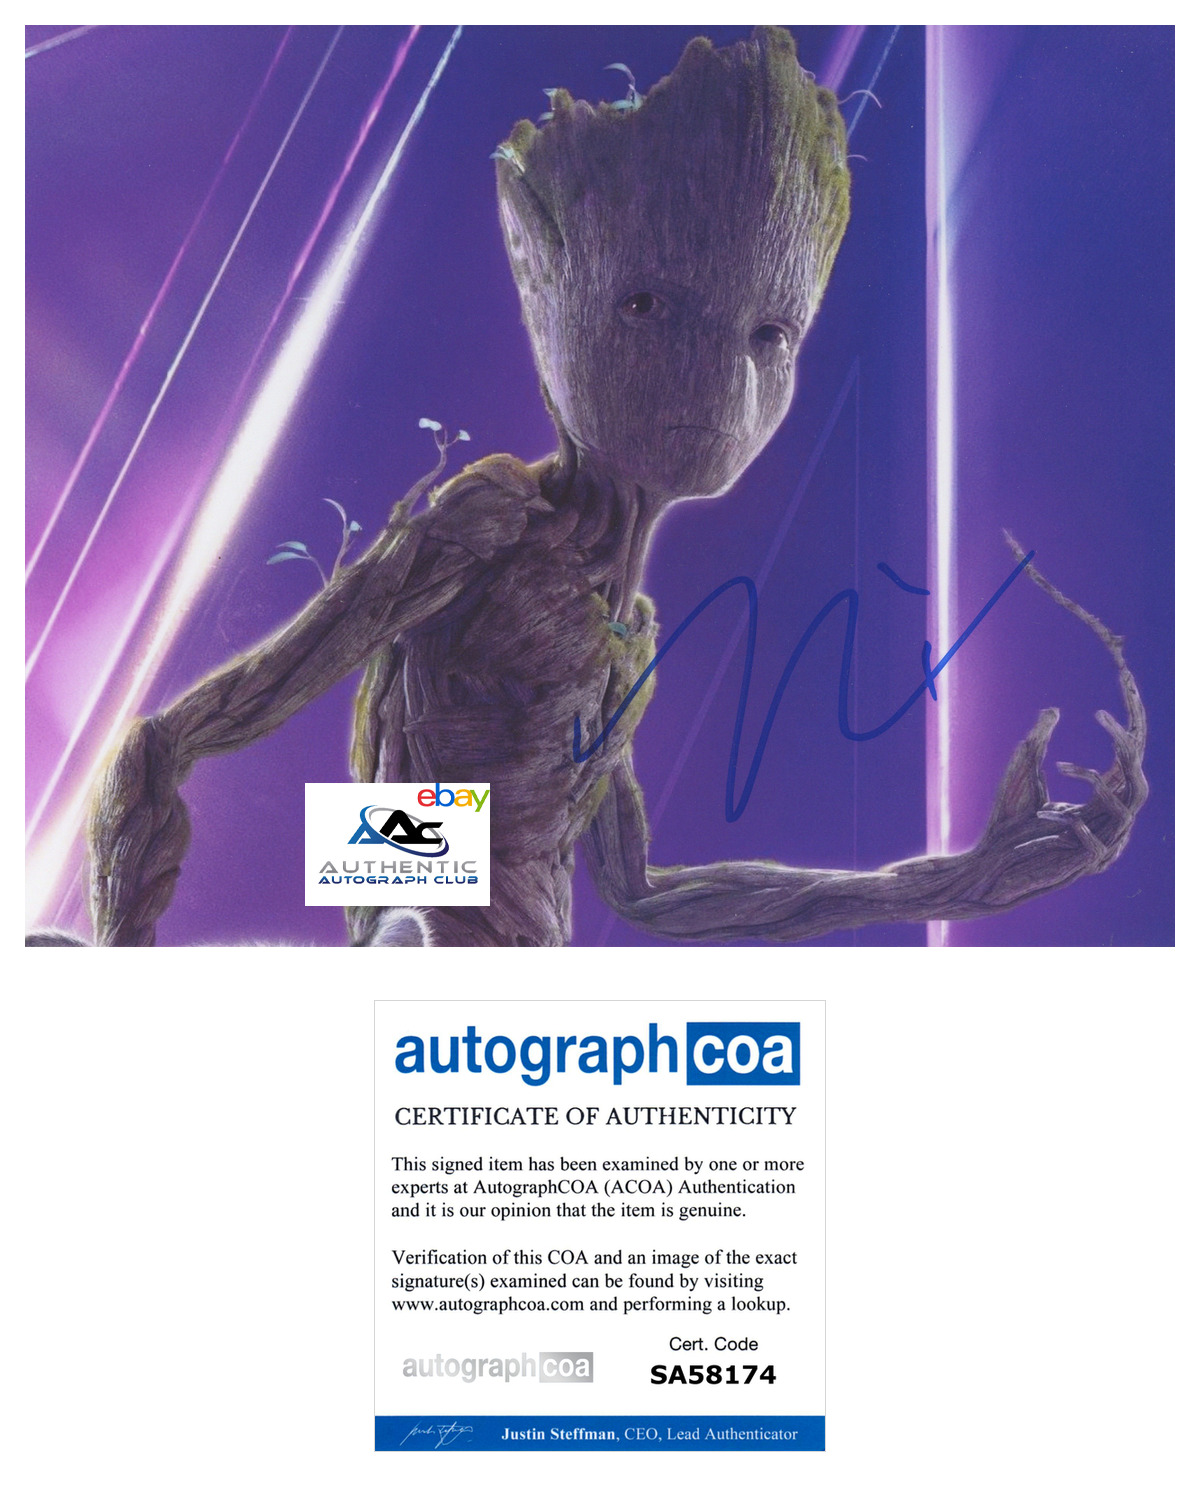 VIN DIESEL AUTOGRAPH SIGNED 8x10 PHOTO GROOT GUARDIANS OF THE GALAXY MARVEL ACOA